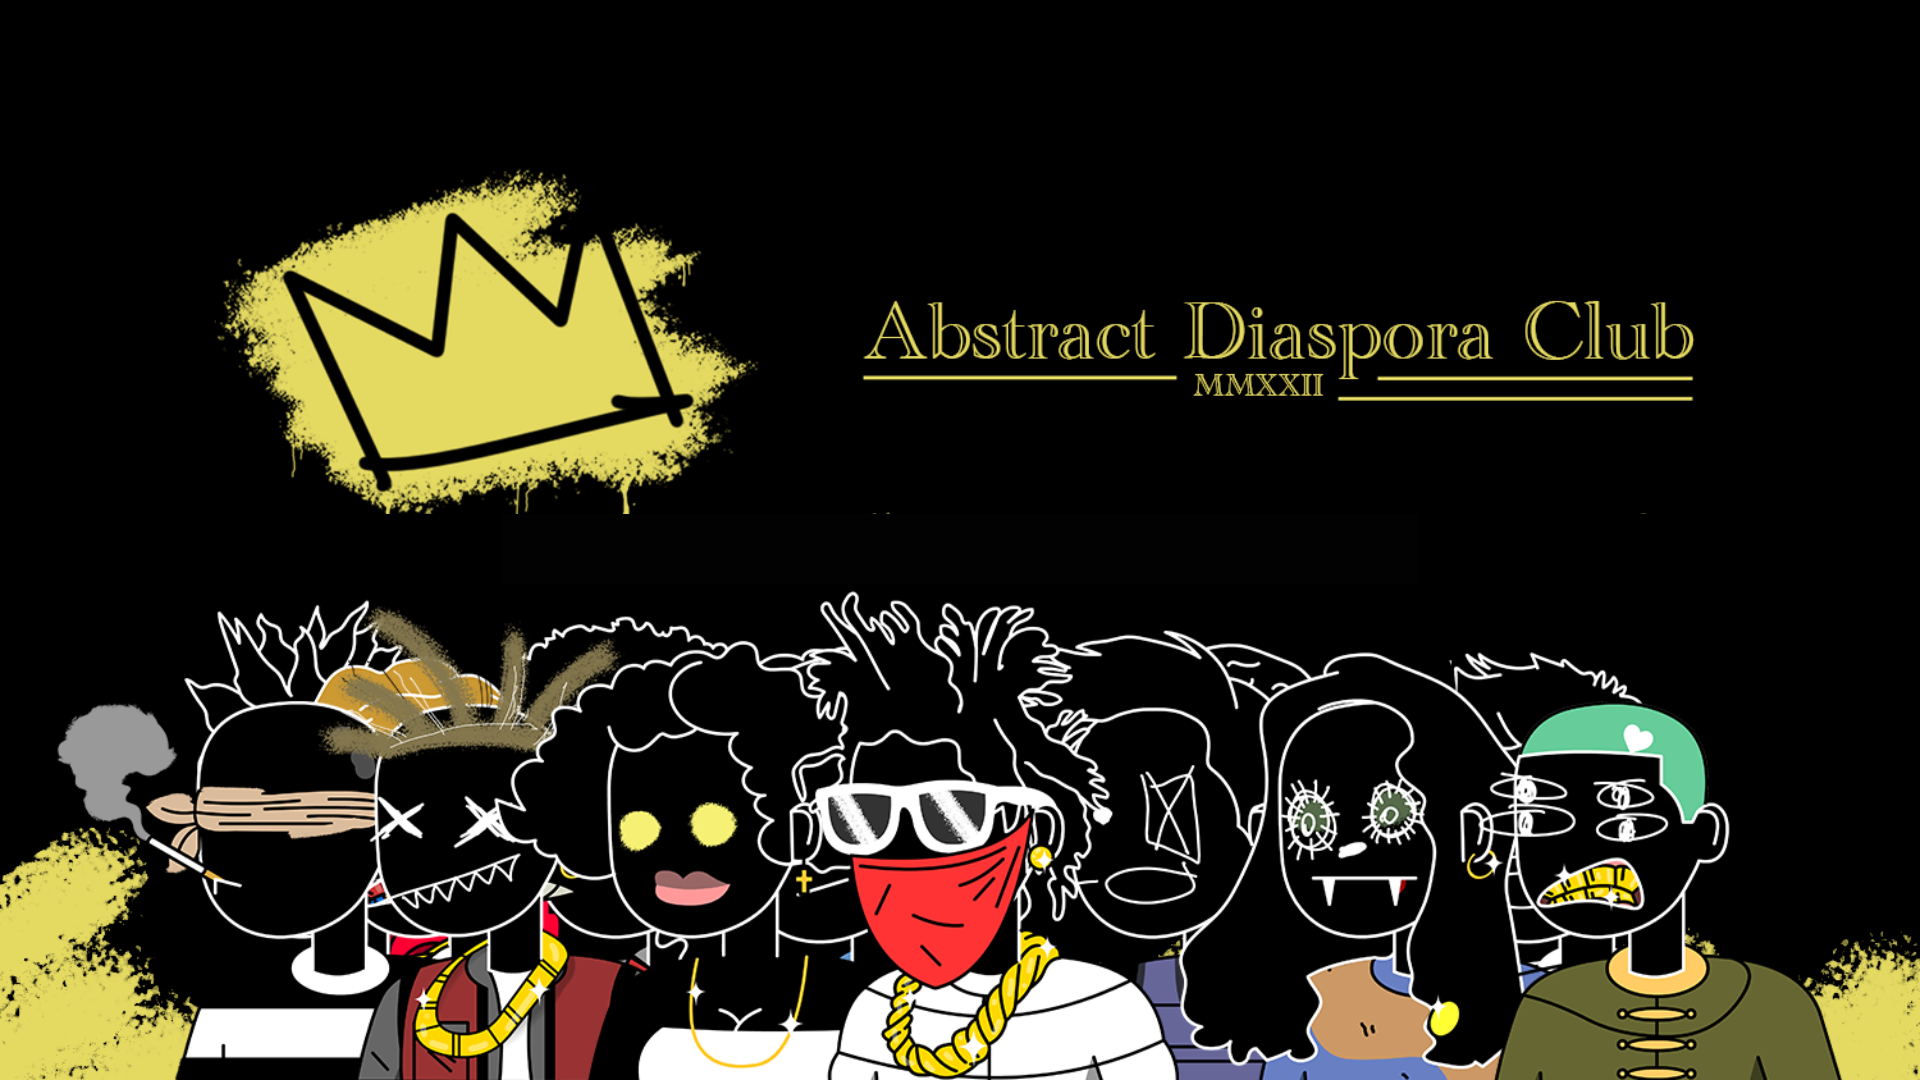 "Friends of Basquiat" is now "Abstract Diaspora Club"